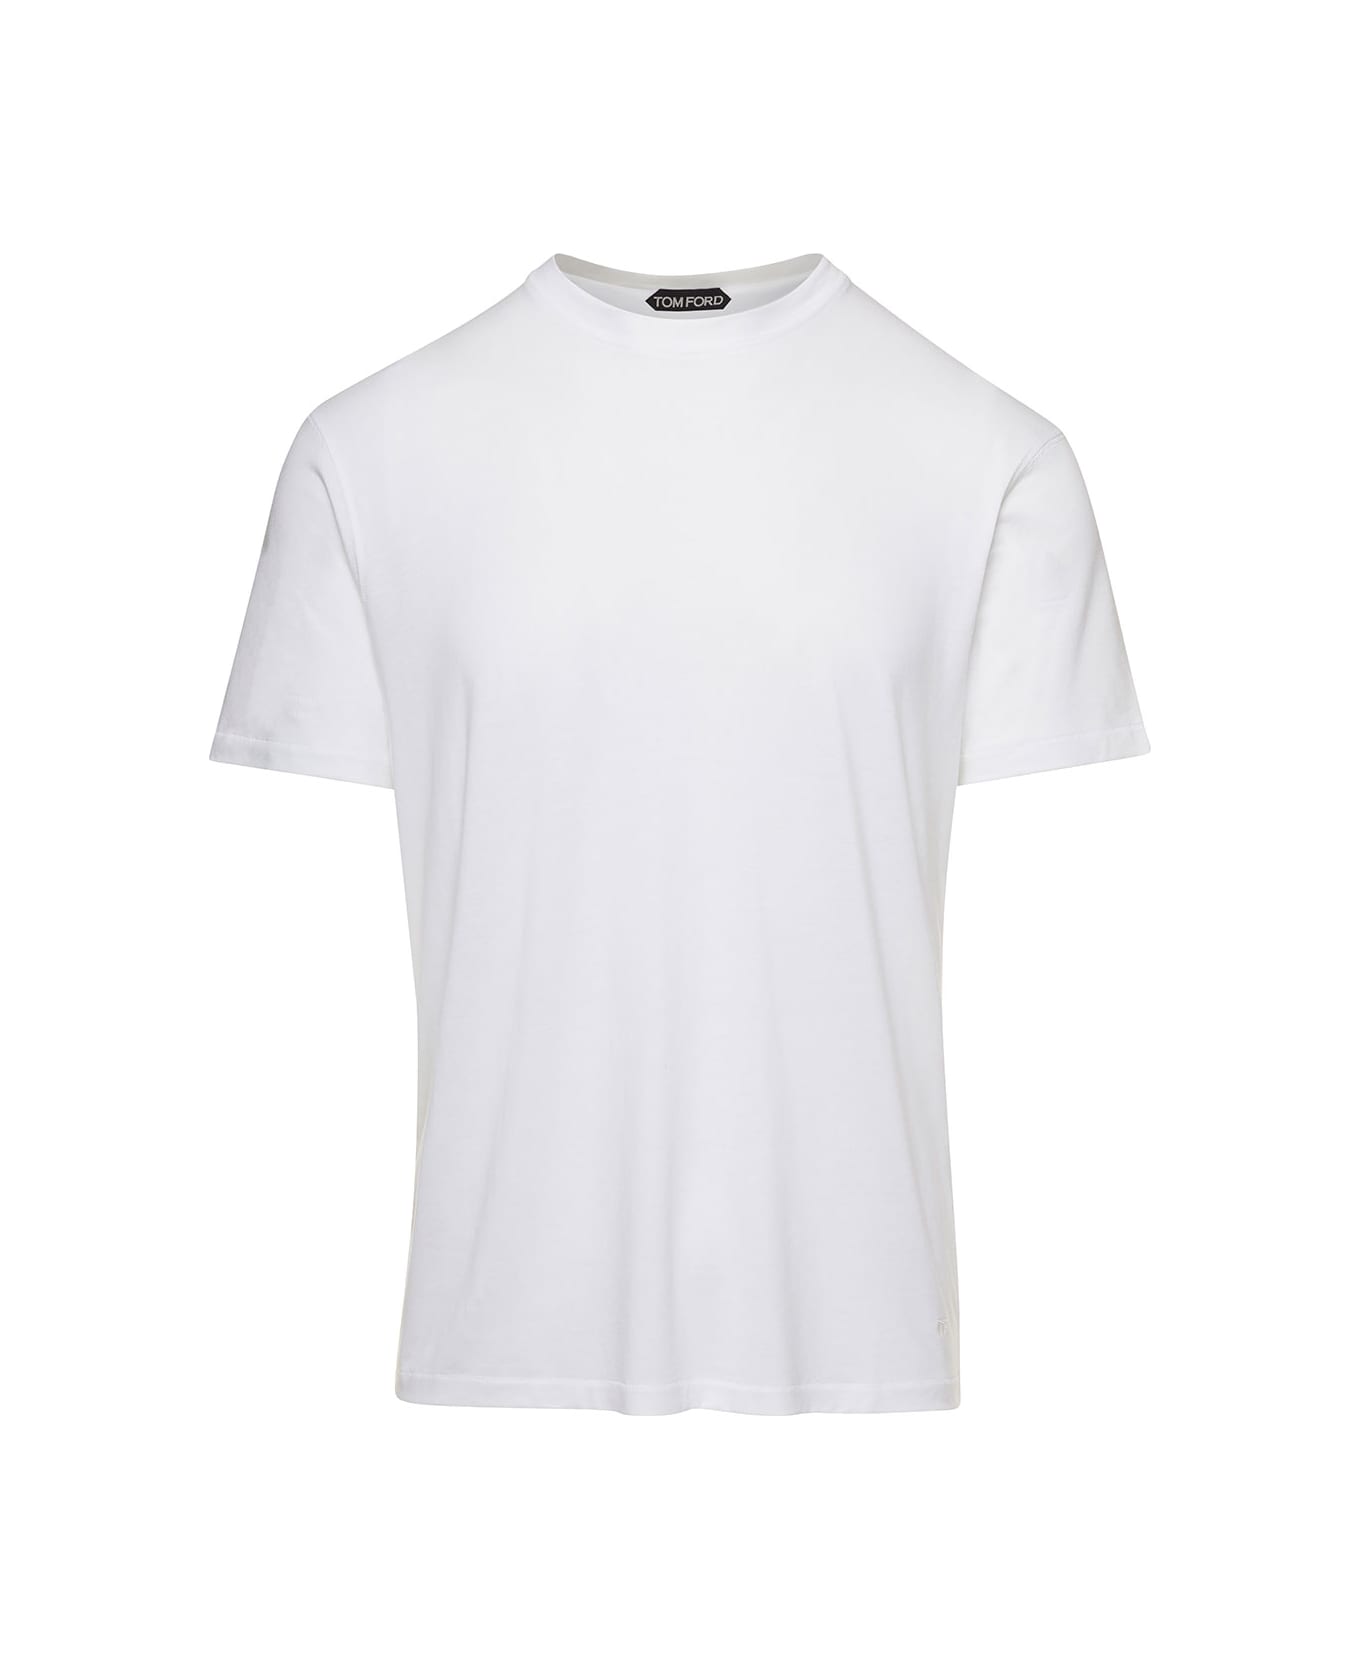 Tom Ford White Basic Crewneck T-shirt With Tonal Stitching In Cotton Blend Man - White